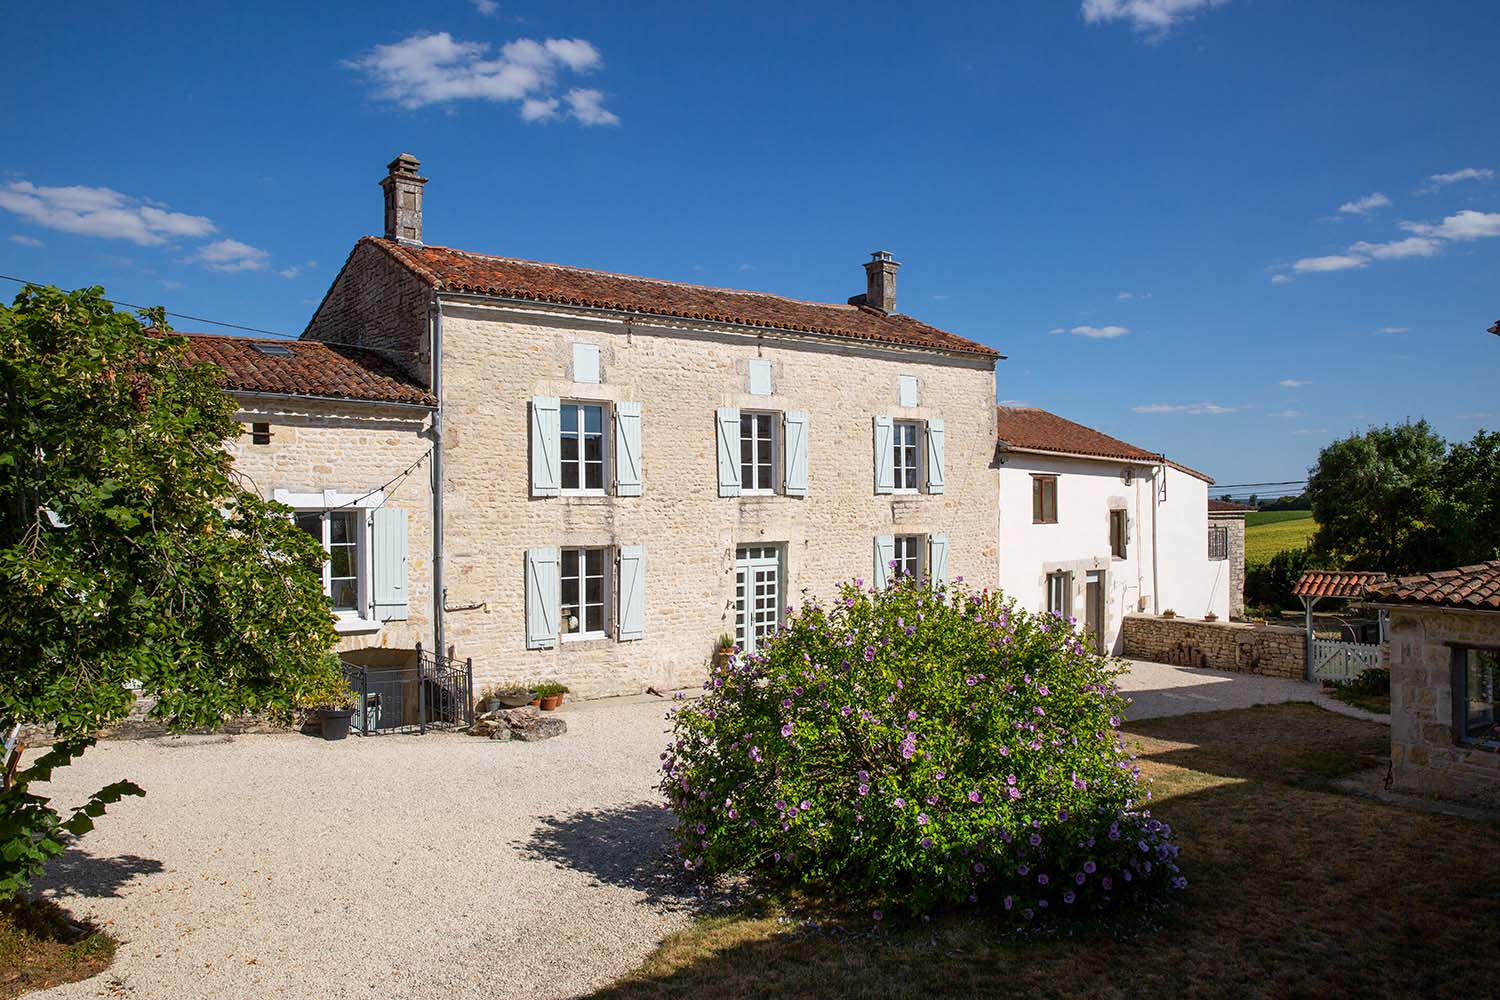 The courtyard of gîte complex La Cour de Husson in the Charente